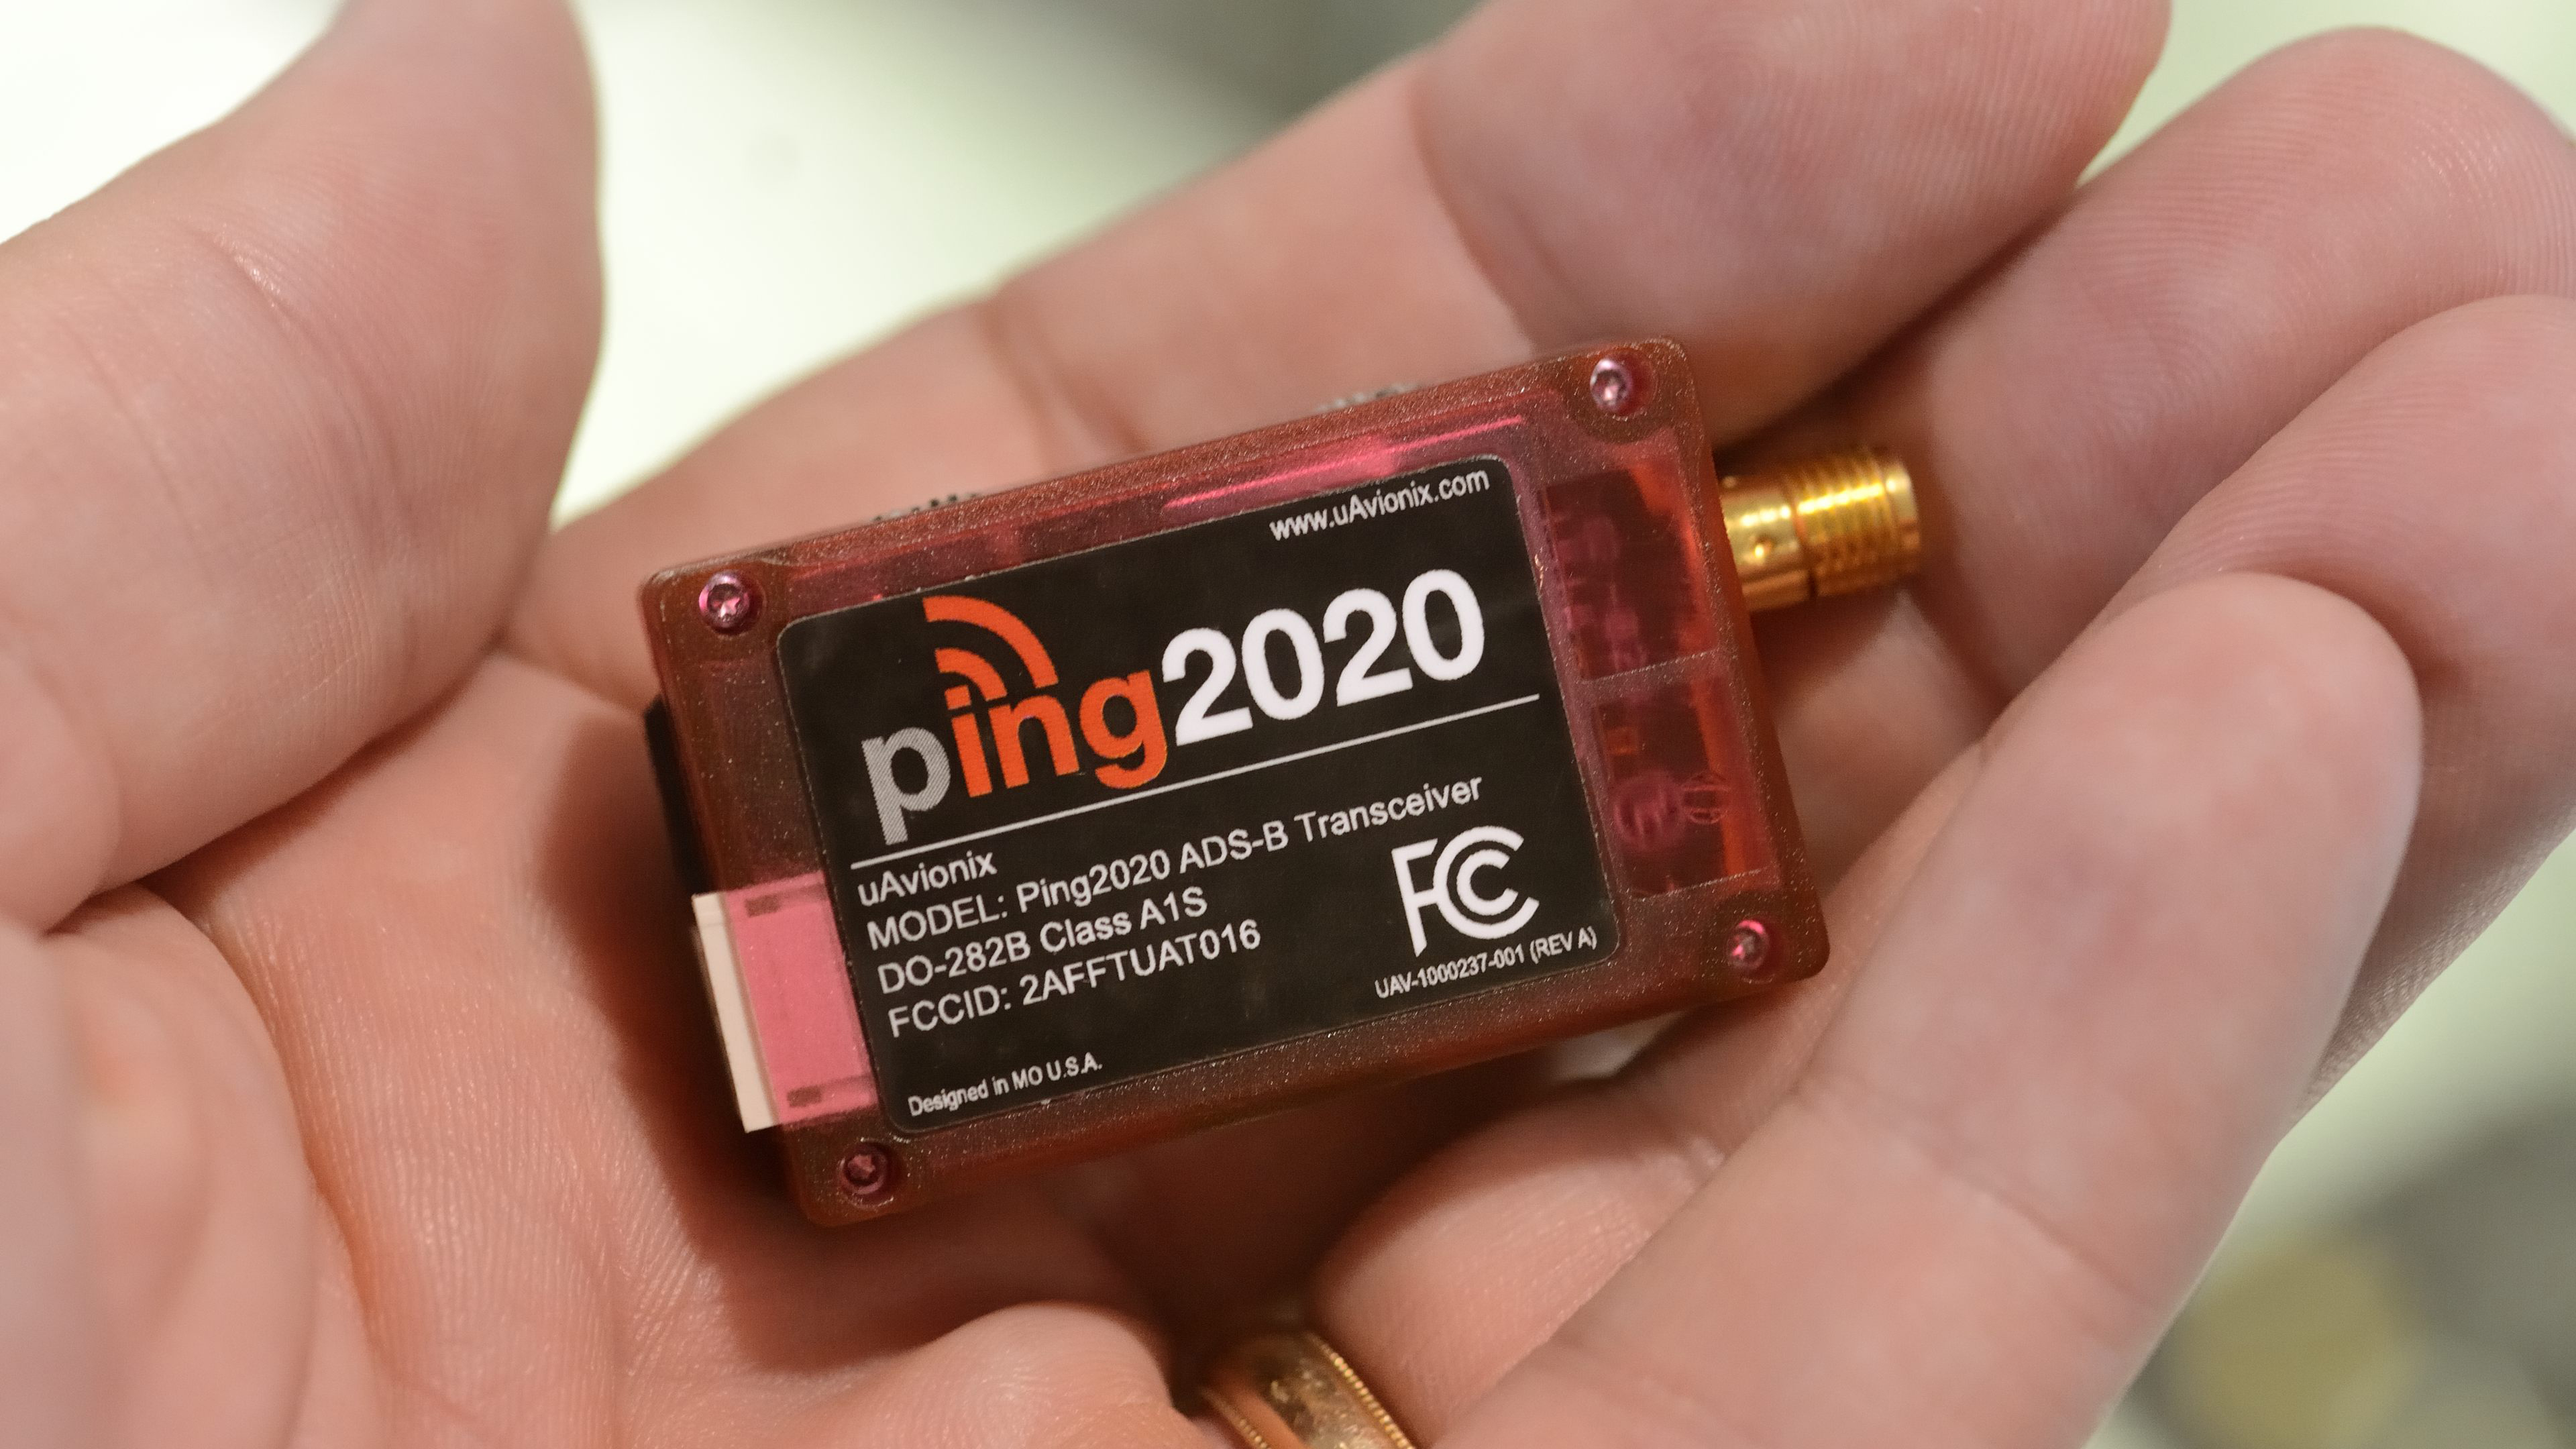 uAvionix showed its Ping2020 ADS-B transceiver at EAA AirVenture 2016. Designed for drones, the miniature UAT weighs 20 grams. Photo by Mike Collins.